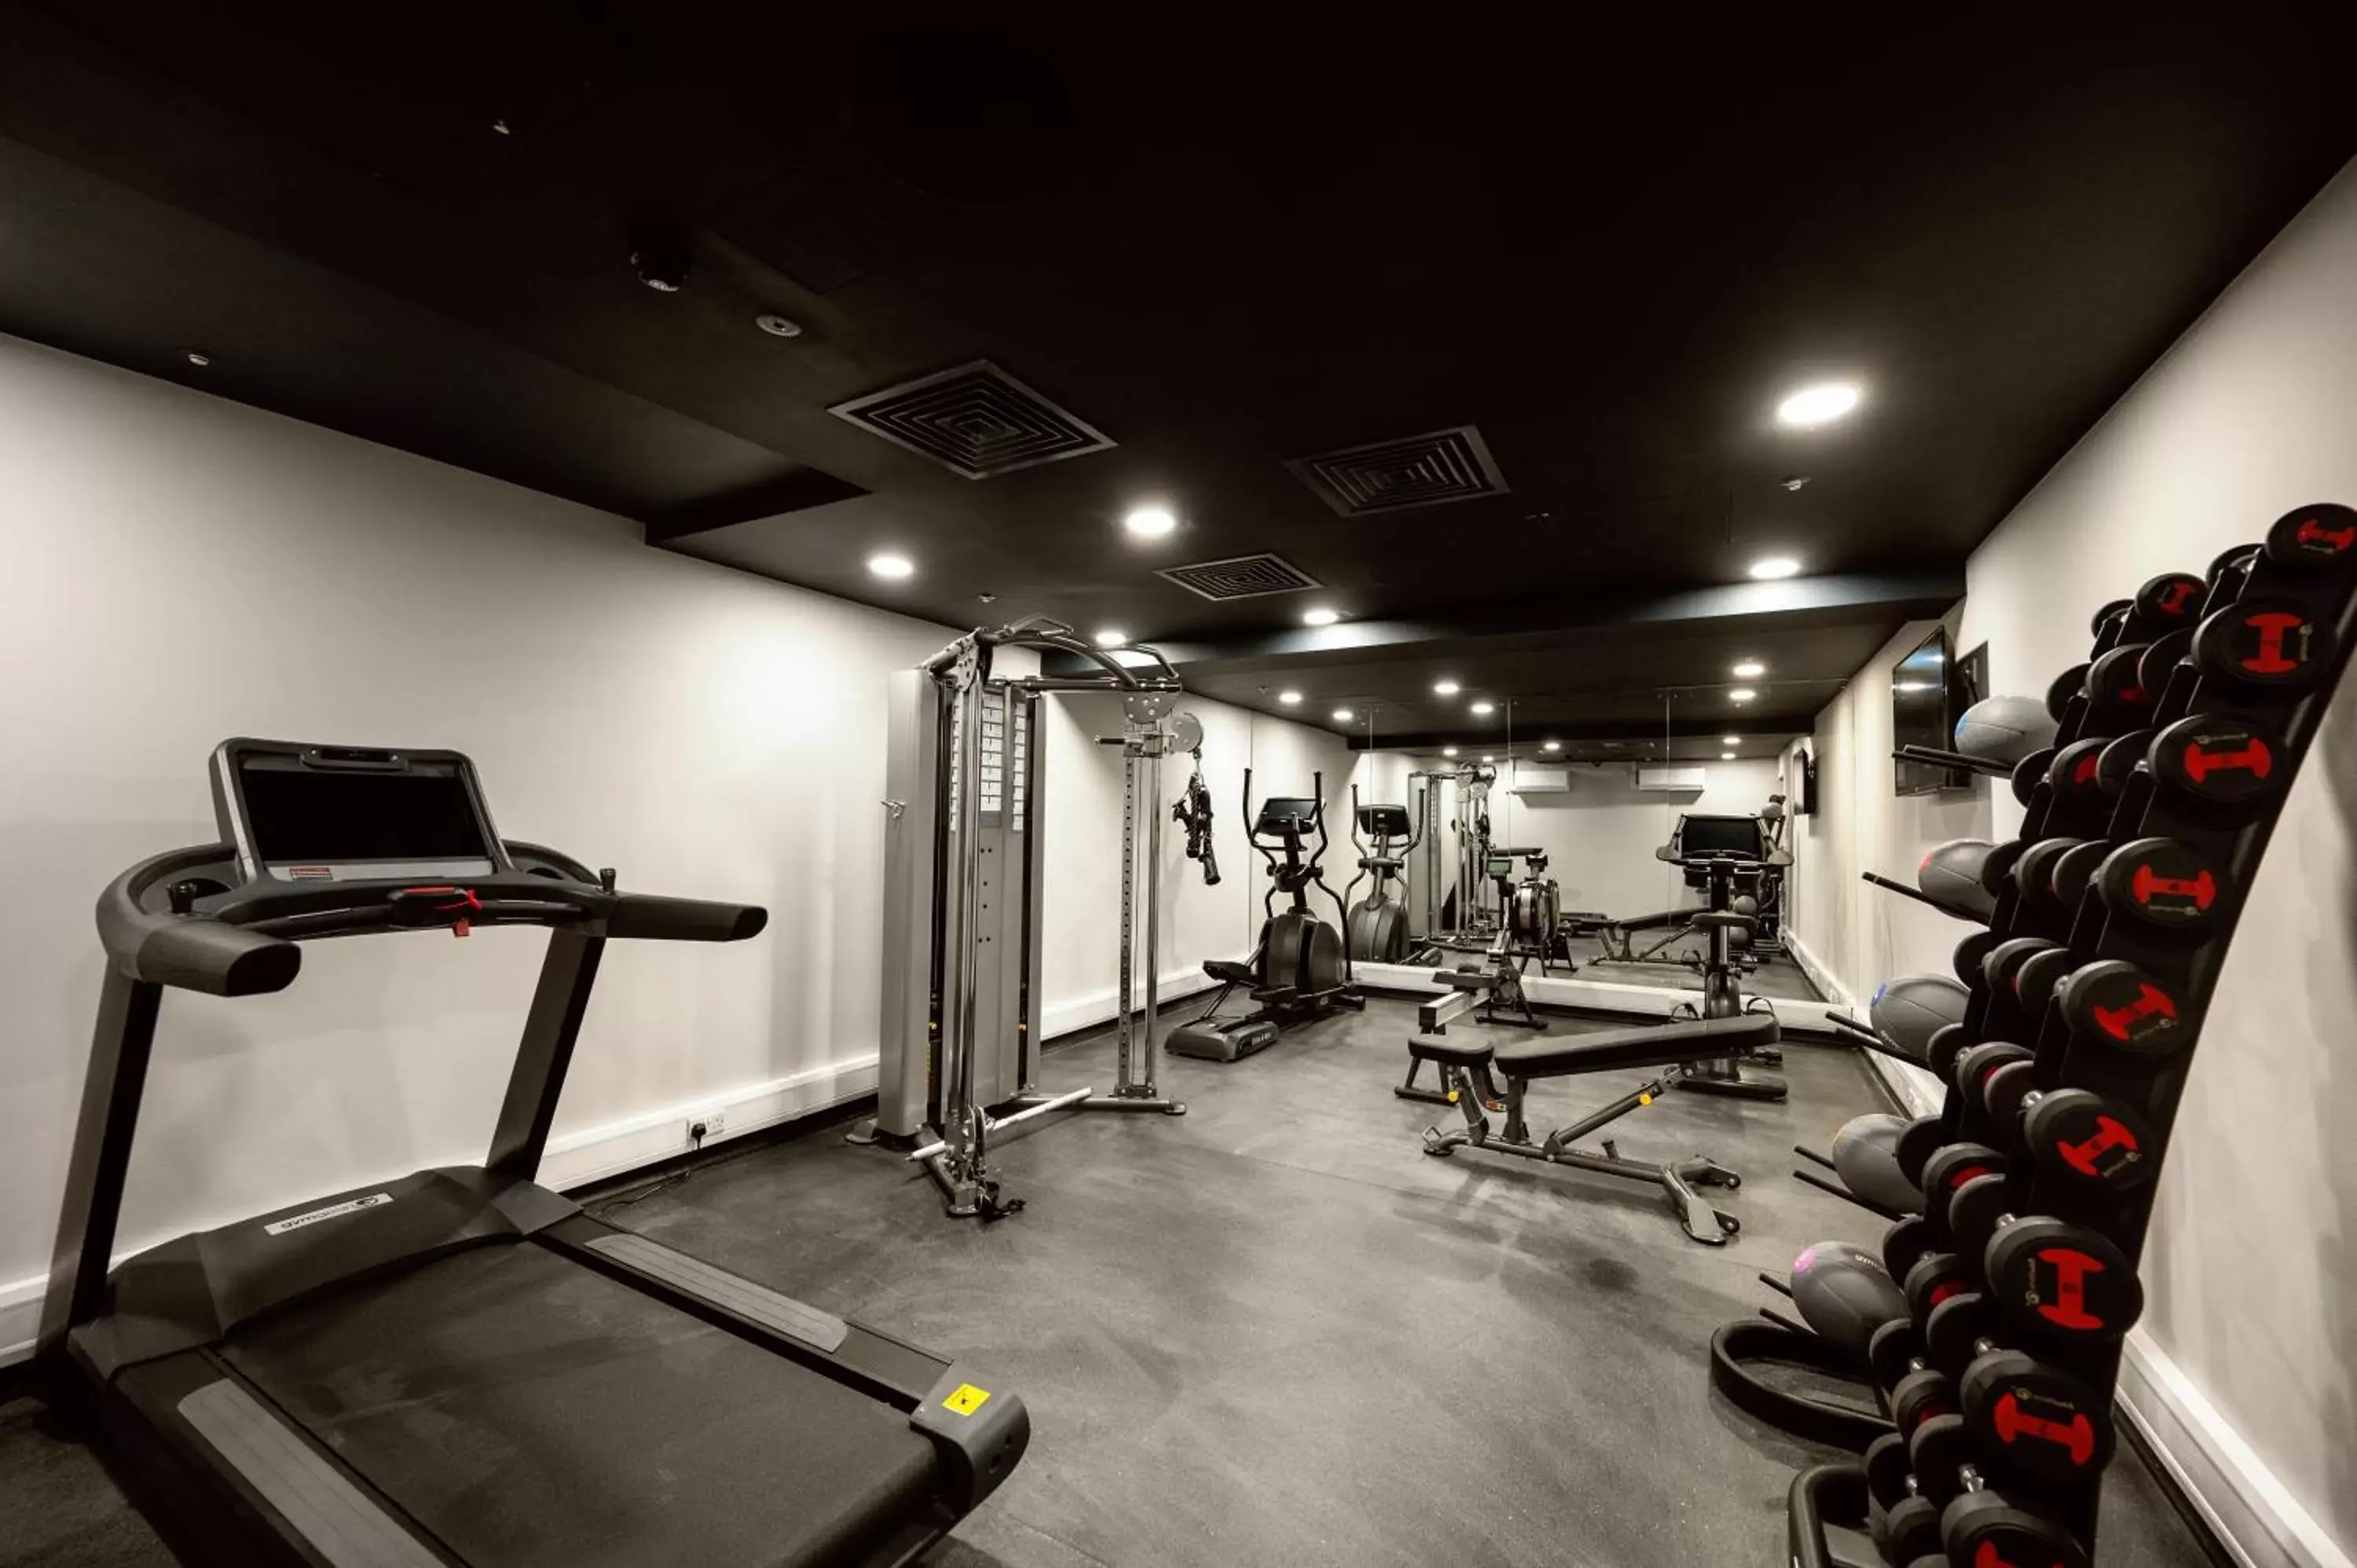 Fitness centre/facilities, Fitness Center/Facilities in Wilde Aparthotels by Staycity London Paddington